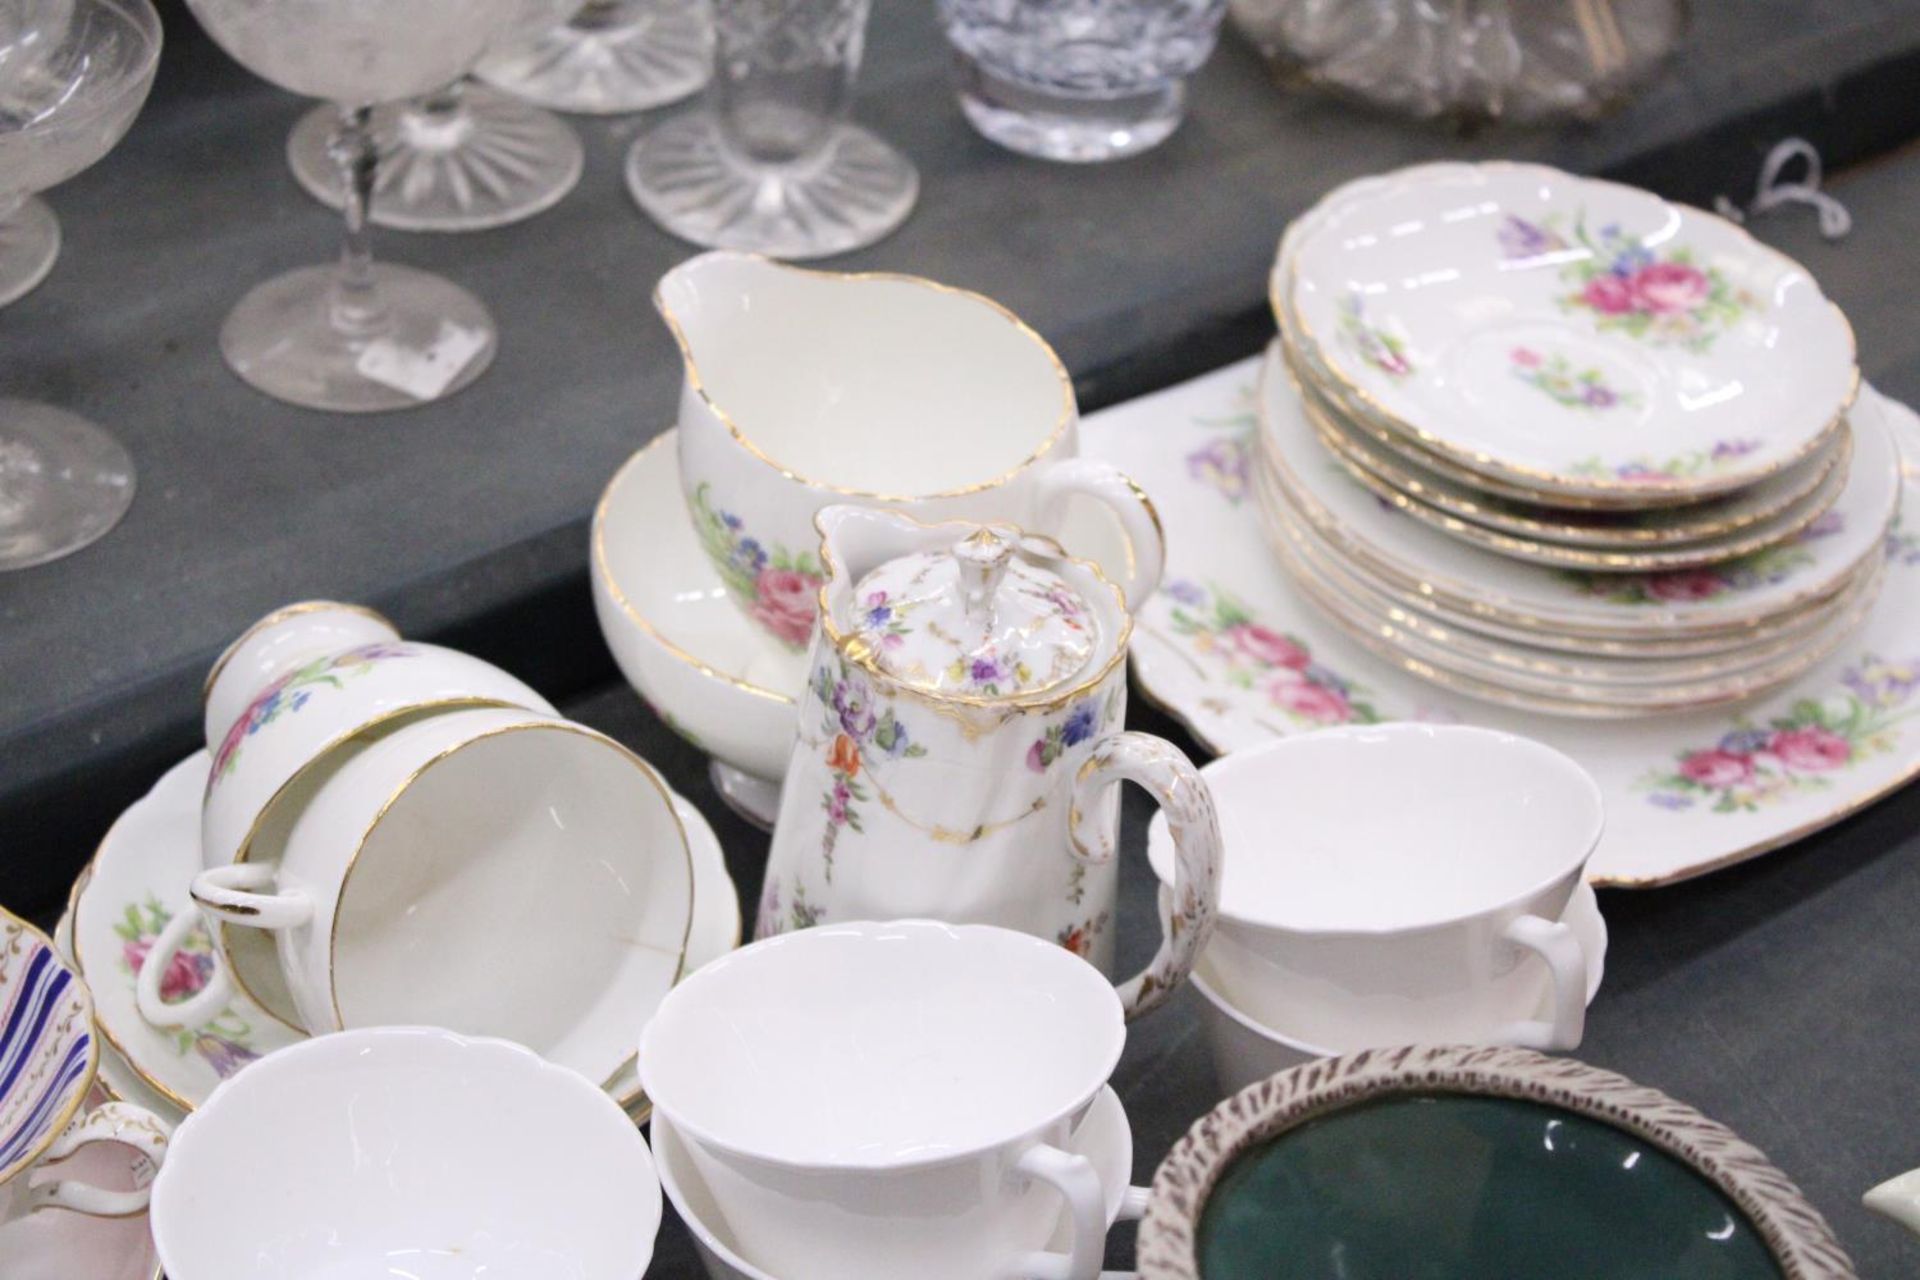 A FOLEY CHINA PART TEASET TO INCLUDE A CAKE PLATE, A CREAM JUG, SUGAR BOWL, CUPS, SAUCERS AND SIDE - Image 6 of 6